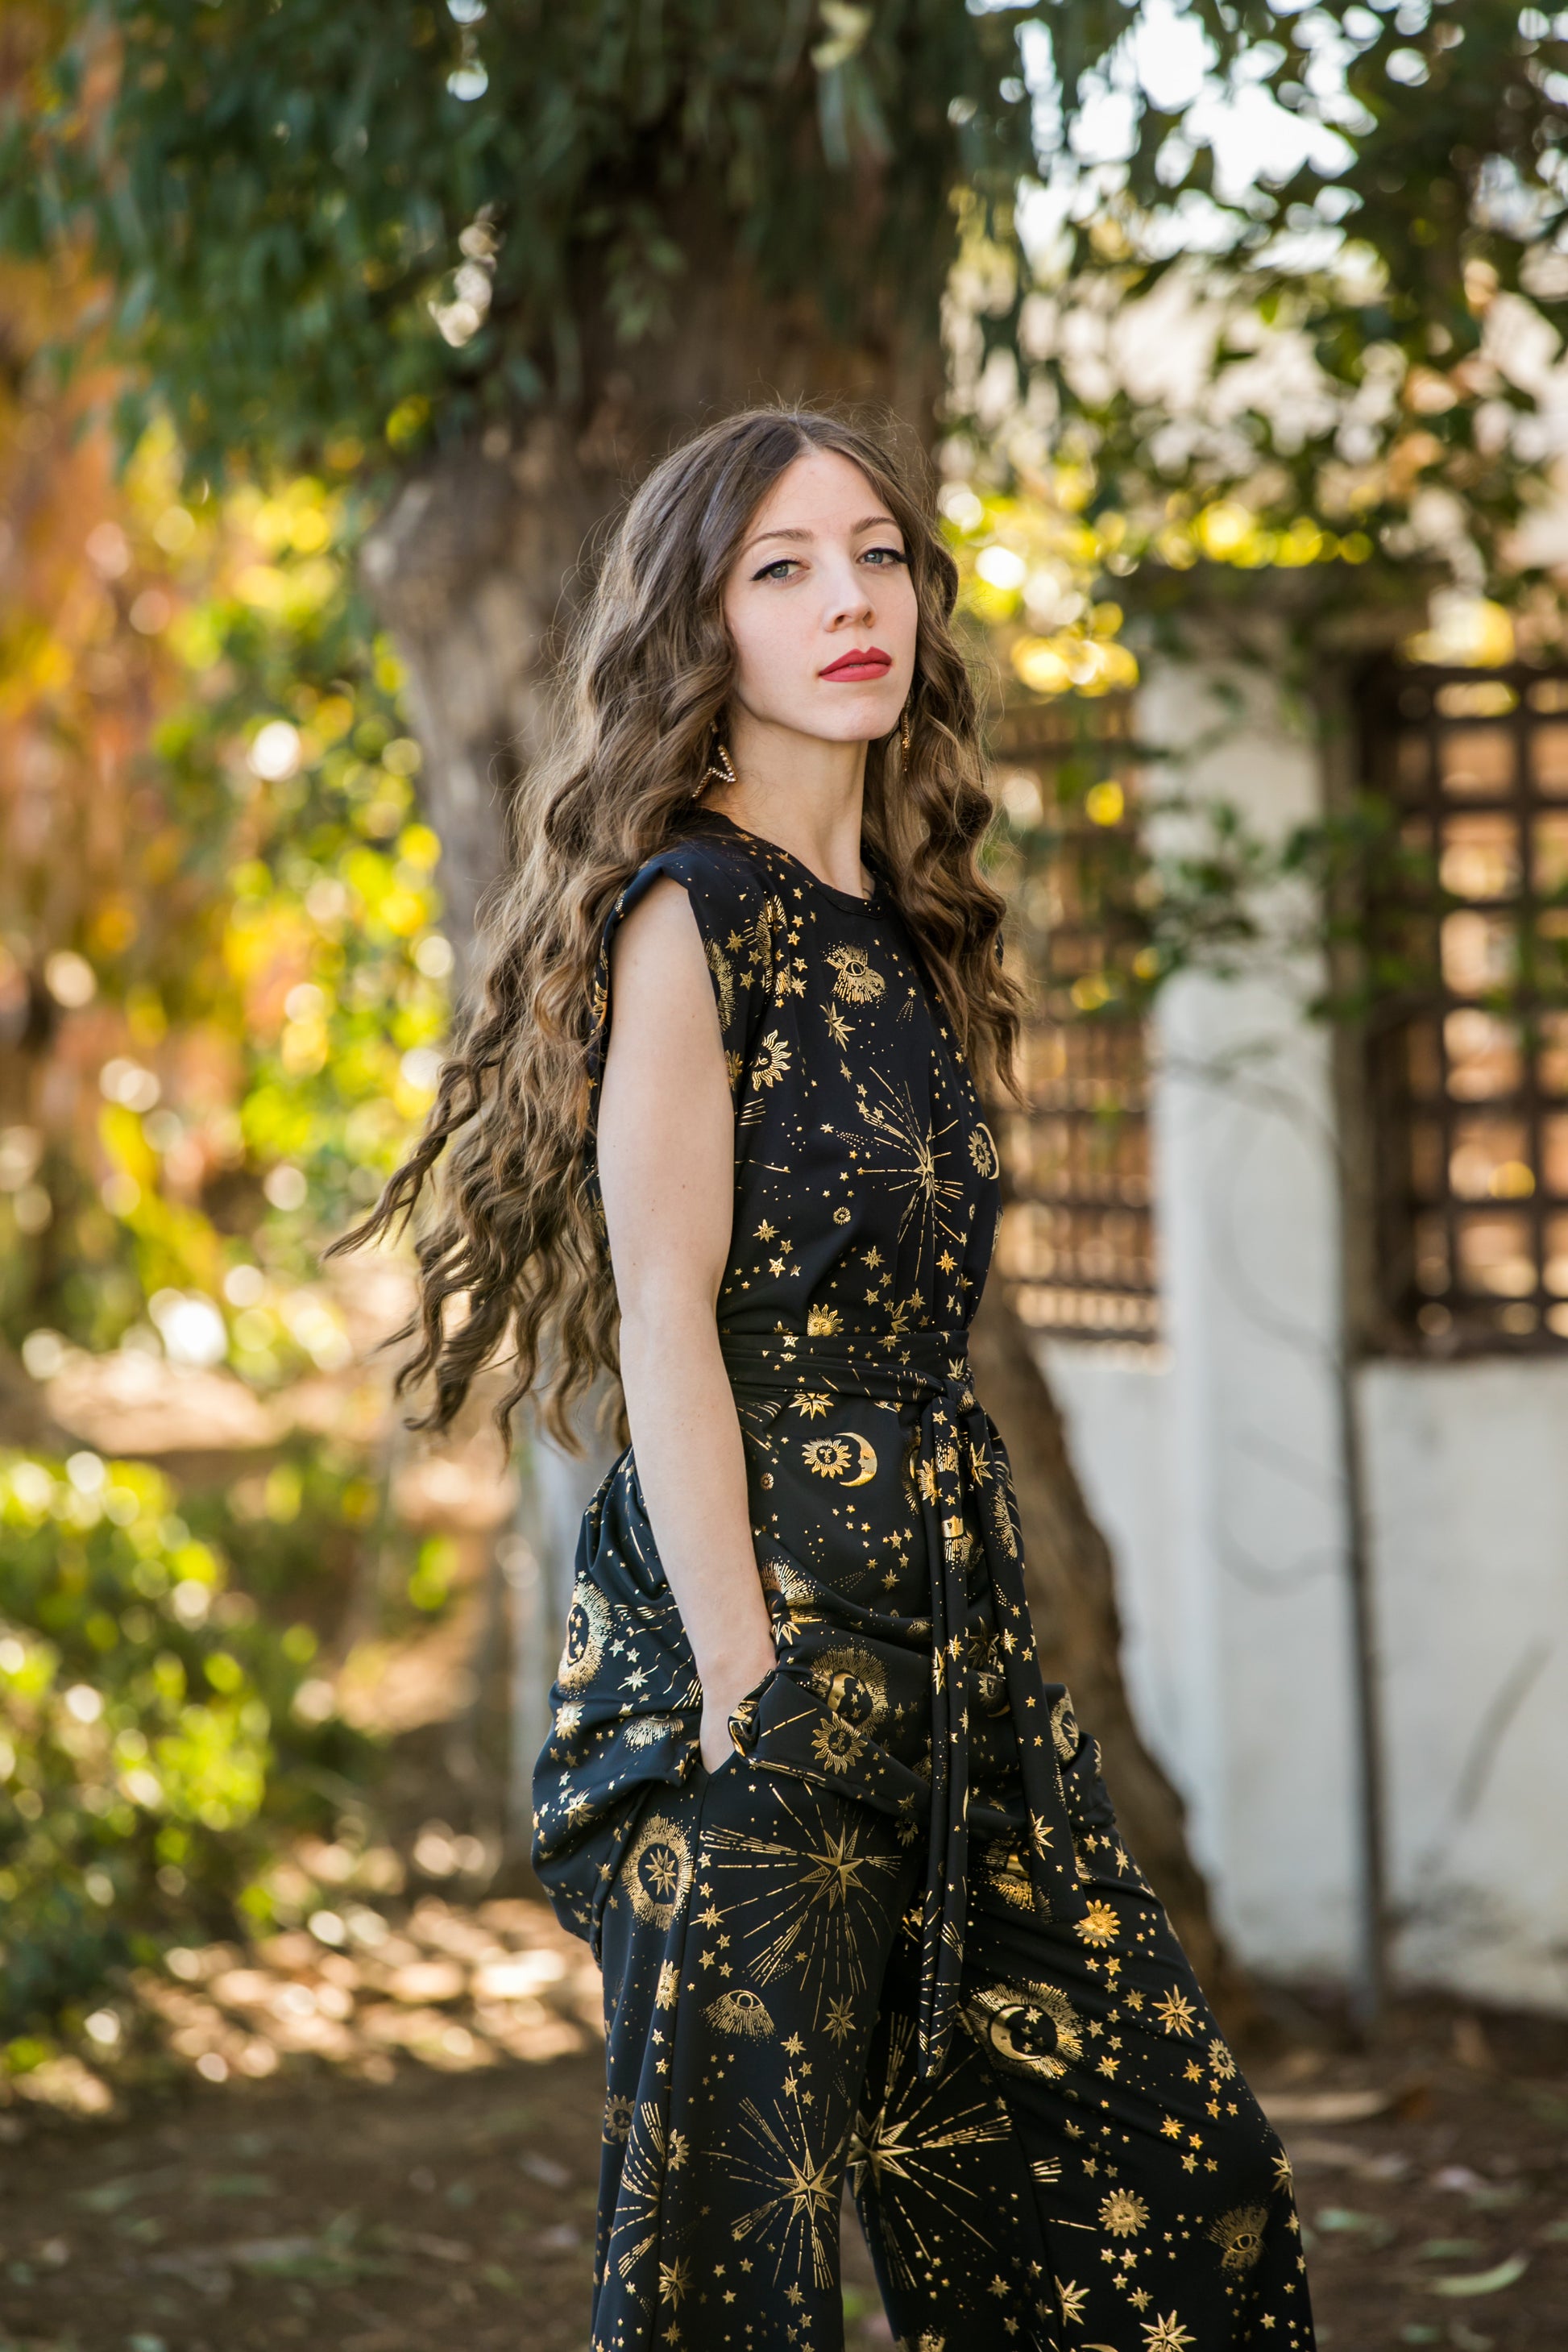 jennafer grace Celestia tunic palazzo pant matching set black with gold metallic celestial print coord co-ord astrology goth witchy gothic boho bohemian hippie romantic whimsical lounge loungewear resort cabana beach unisex handmade in california usa